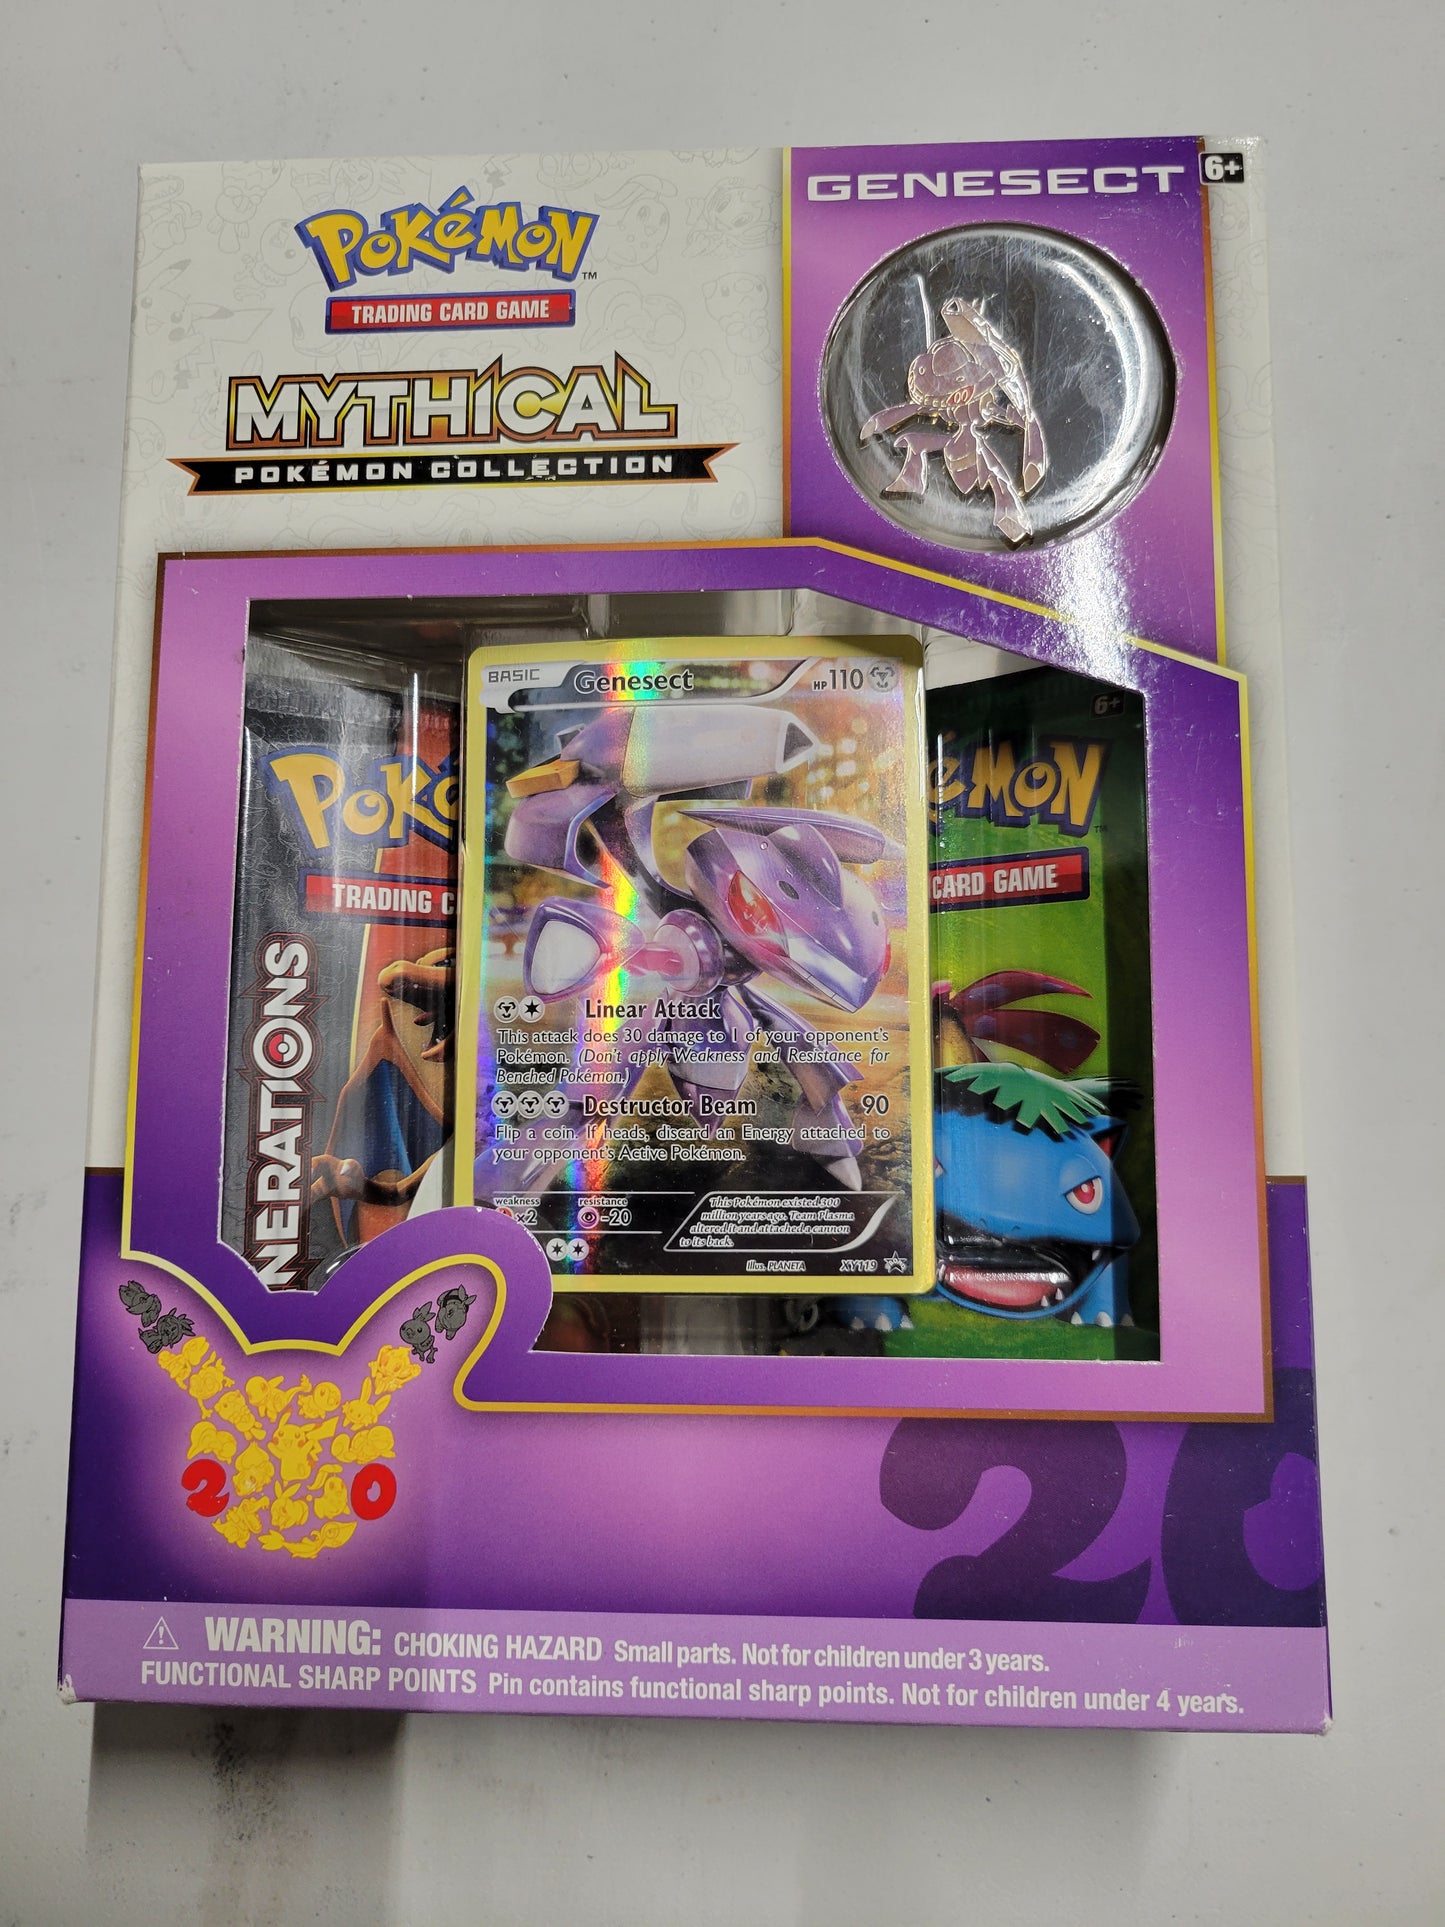 Genesect Mythical Box